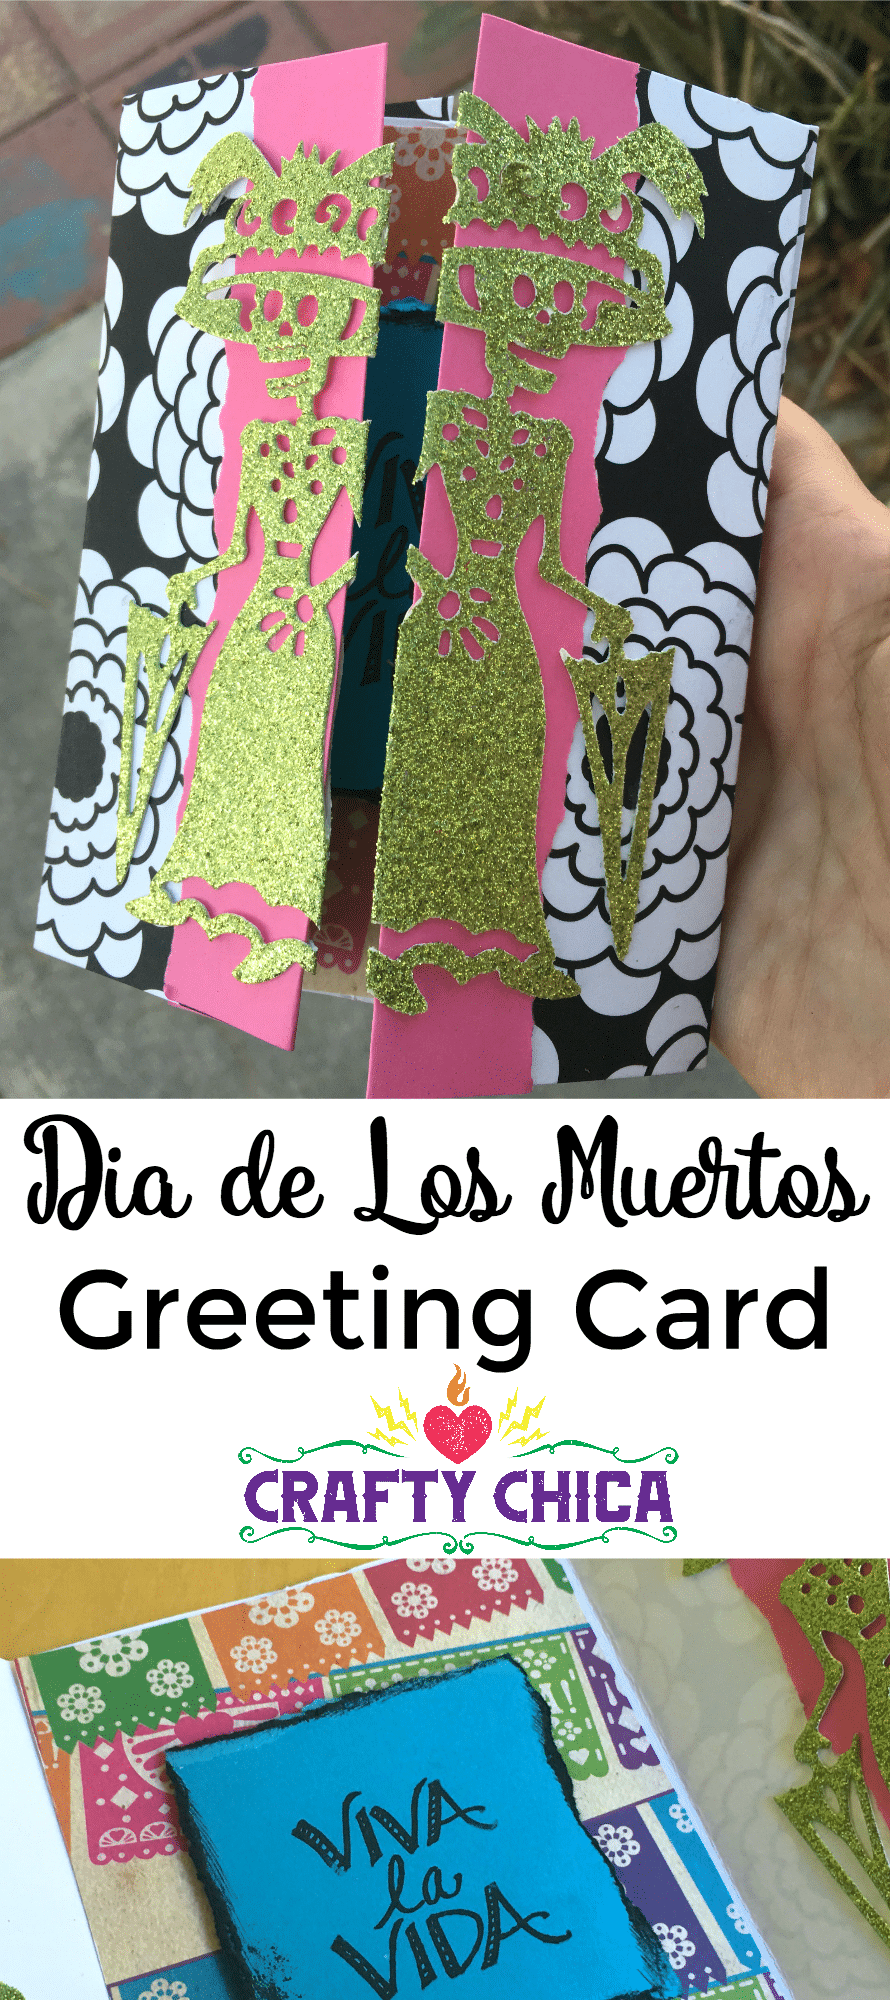 Day of The Dead craft - gatefold greeting card diy